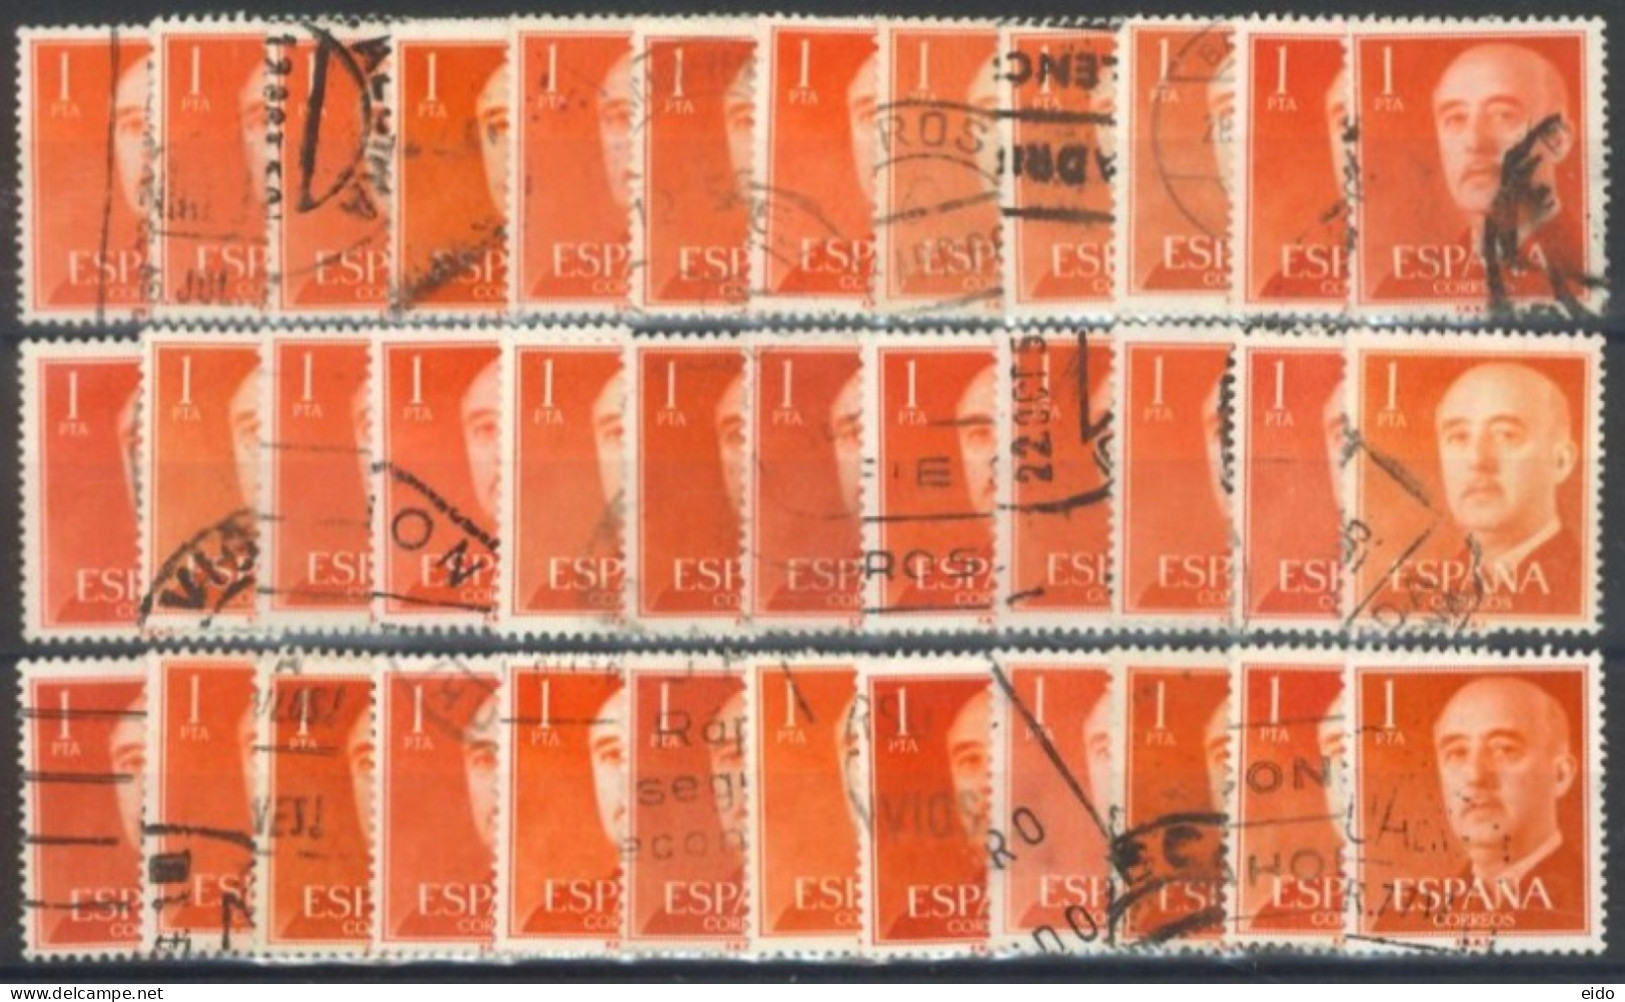 SPAIN- 1954/56, GENERAL FRANCO STAMP QTY : 36 REDUSED SPECIAL PRICE # 825, USED. - Usati